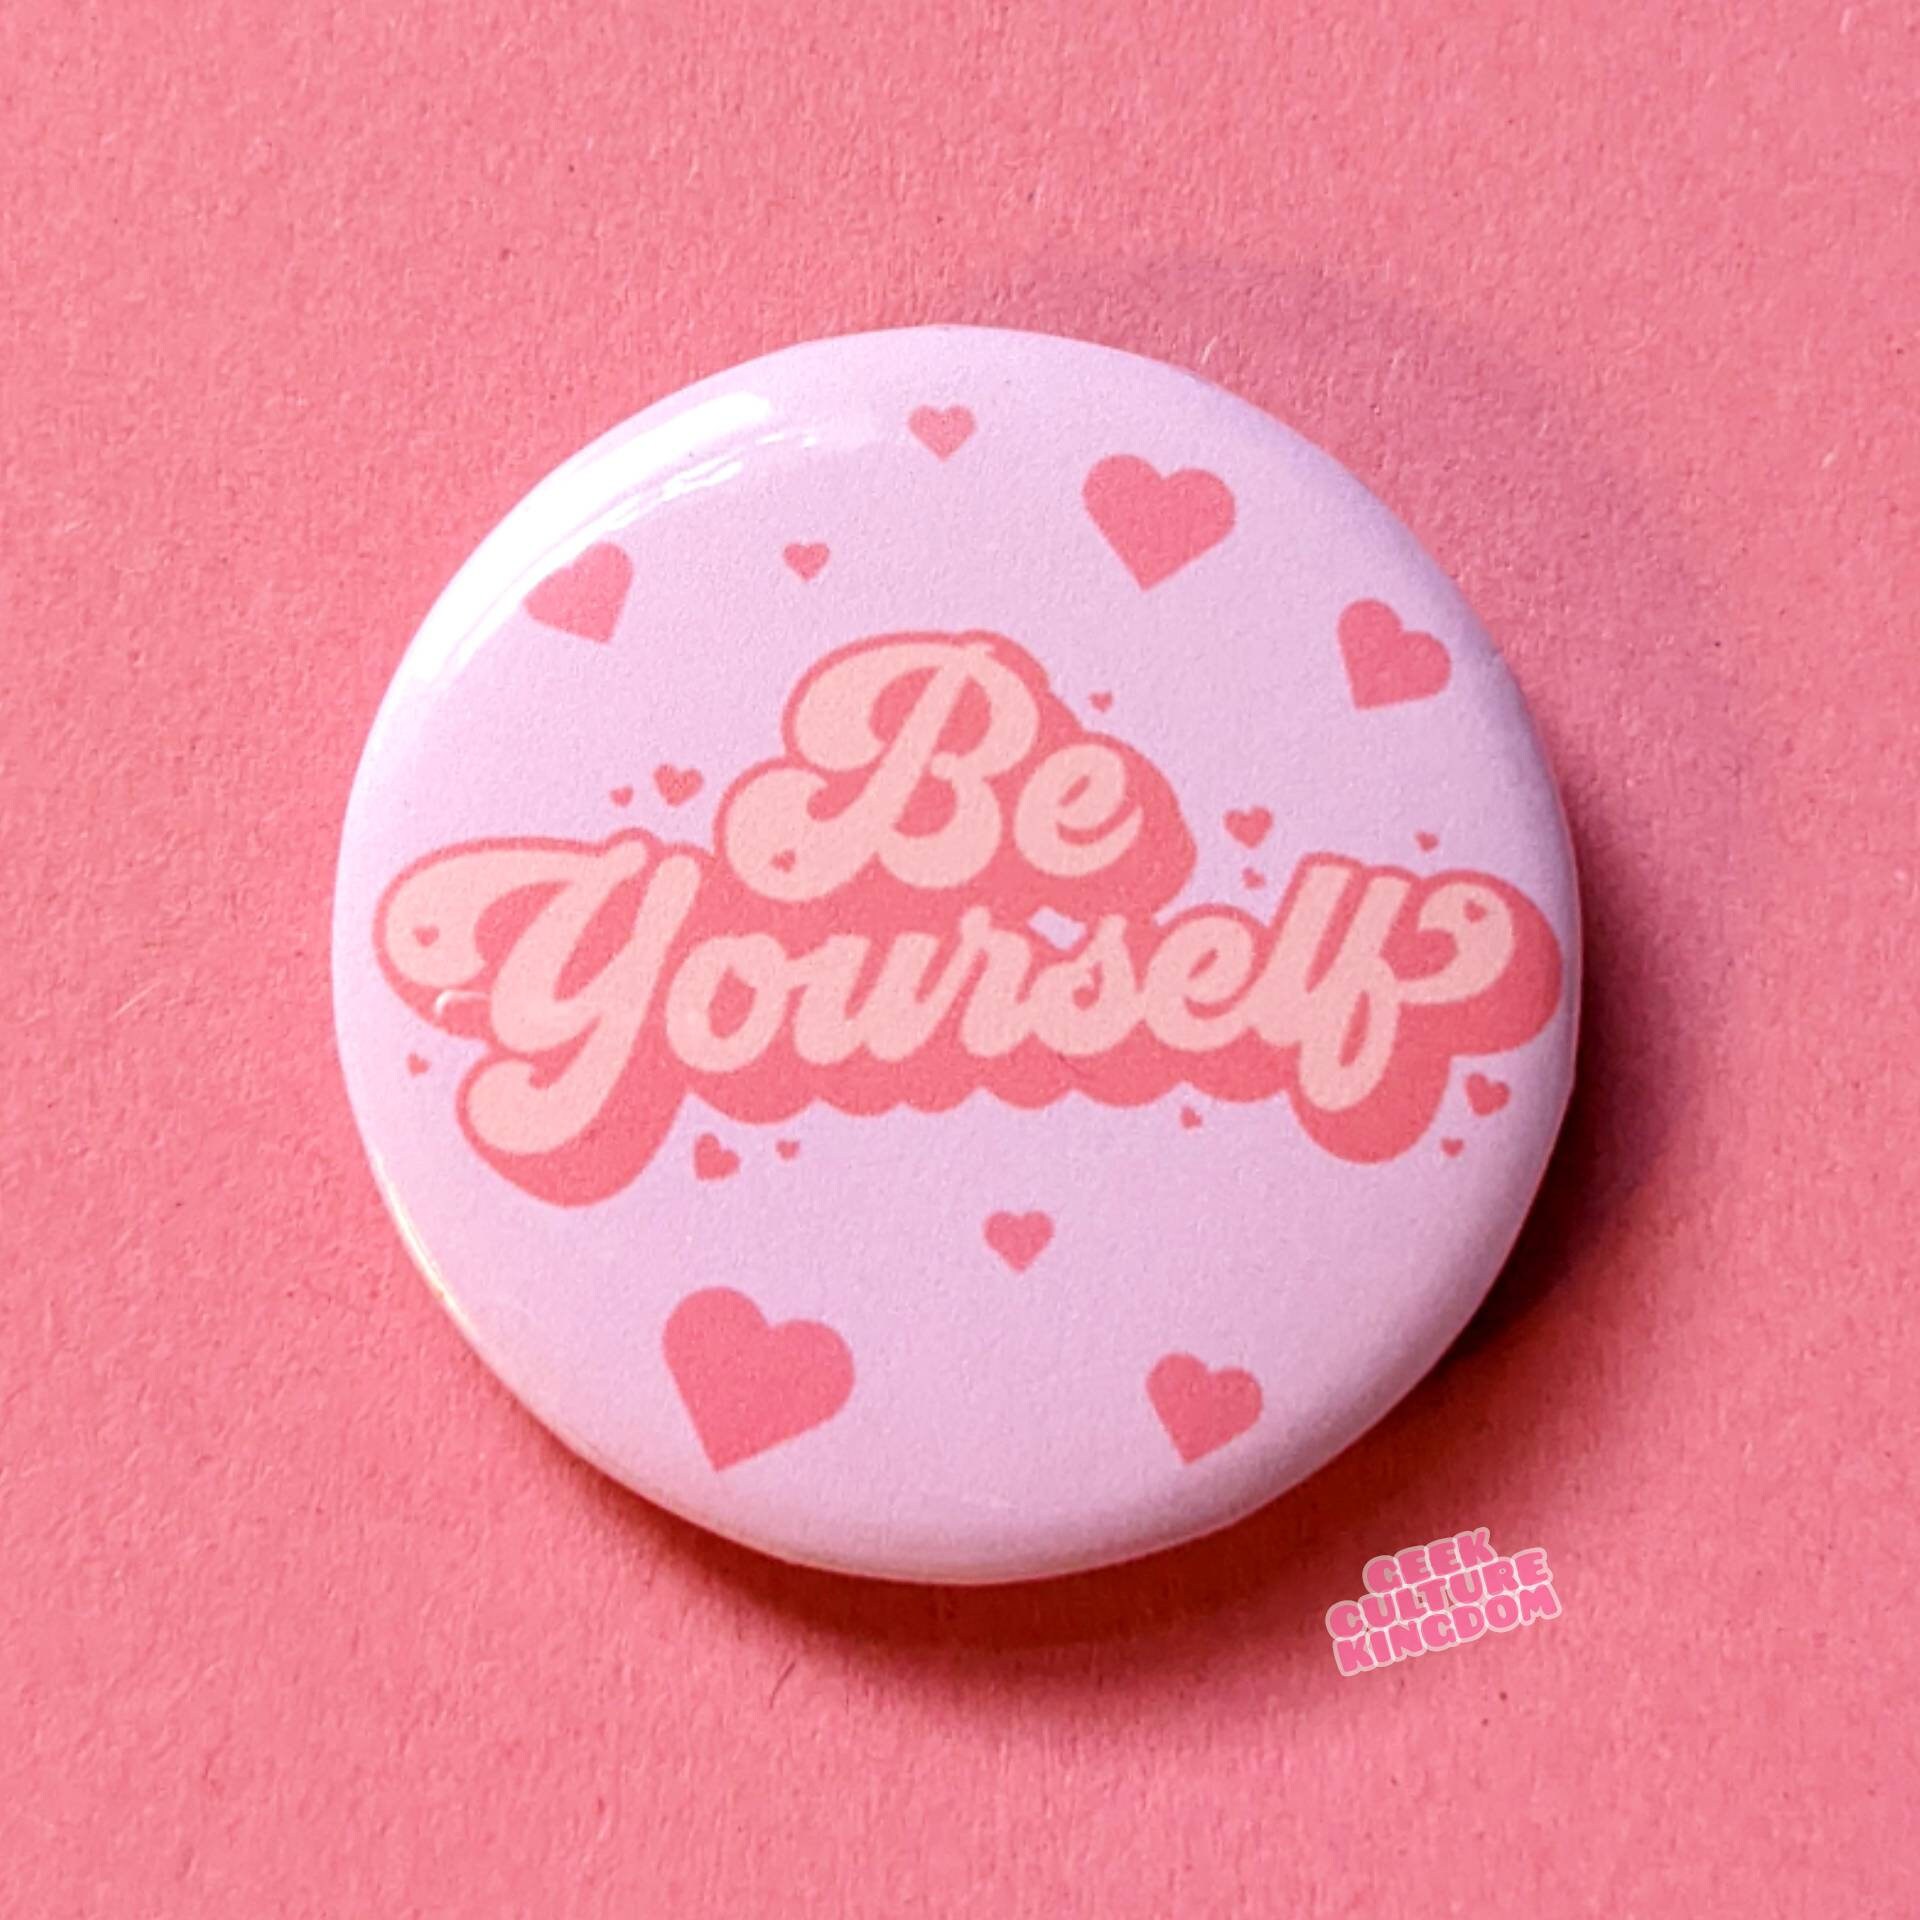 Be Yourself Badge 